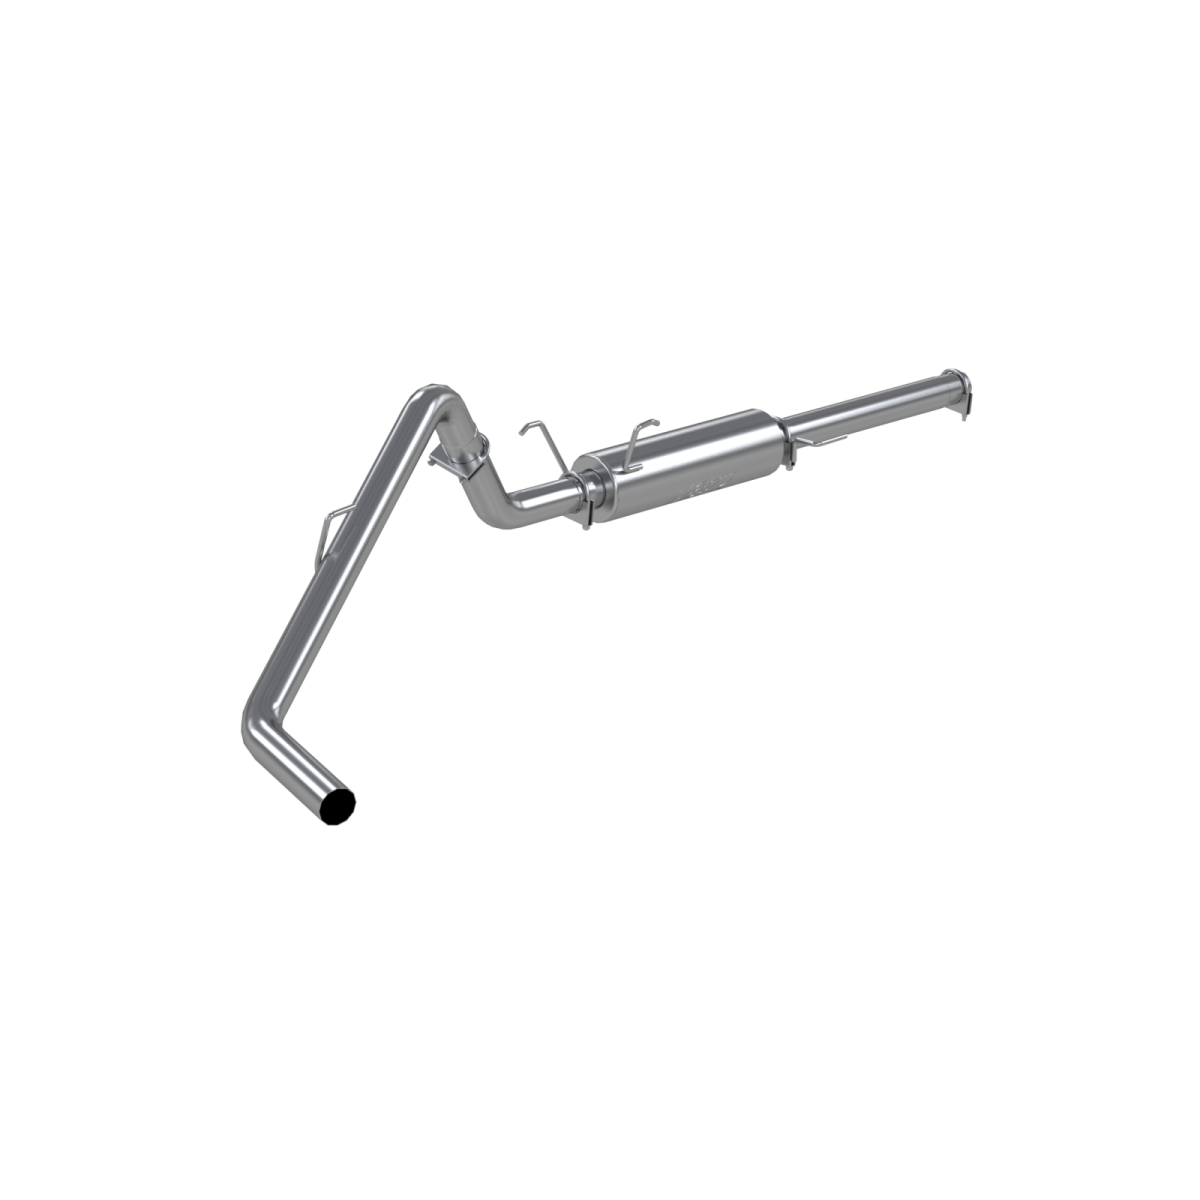 MBRP - MBRP Cat Back Exhaust System Single Side No Tip Aluminized Steel For 04-05 Dodge Ram Hemi 1500 5.7L Standard Cab/Crew Cab/Short Bed S5104P